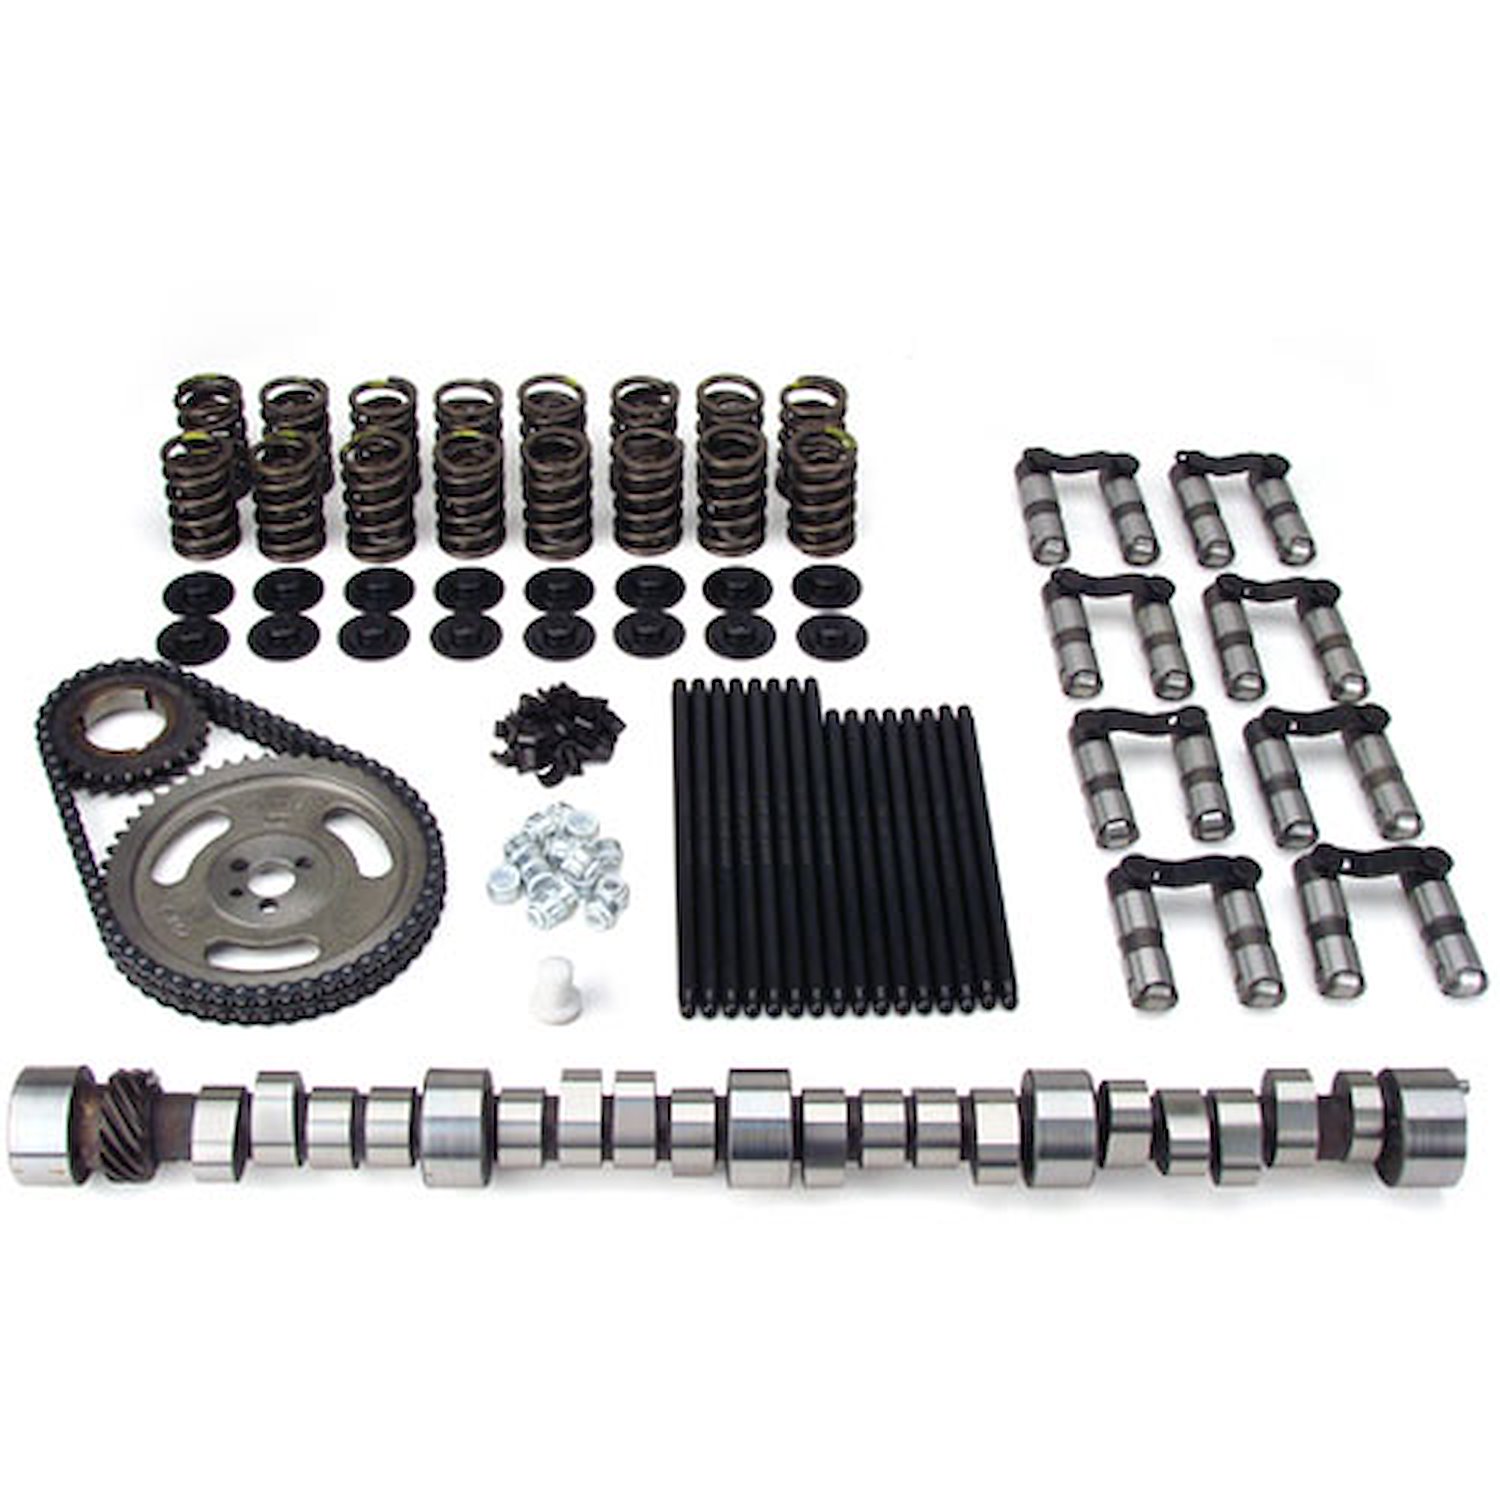 Magnum Hydraulic Roller Camshaft Complete Kit Chevy Small Block 305 & 350 Factory Roller Lift: .600"/.600"